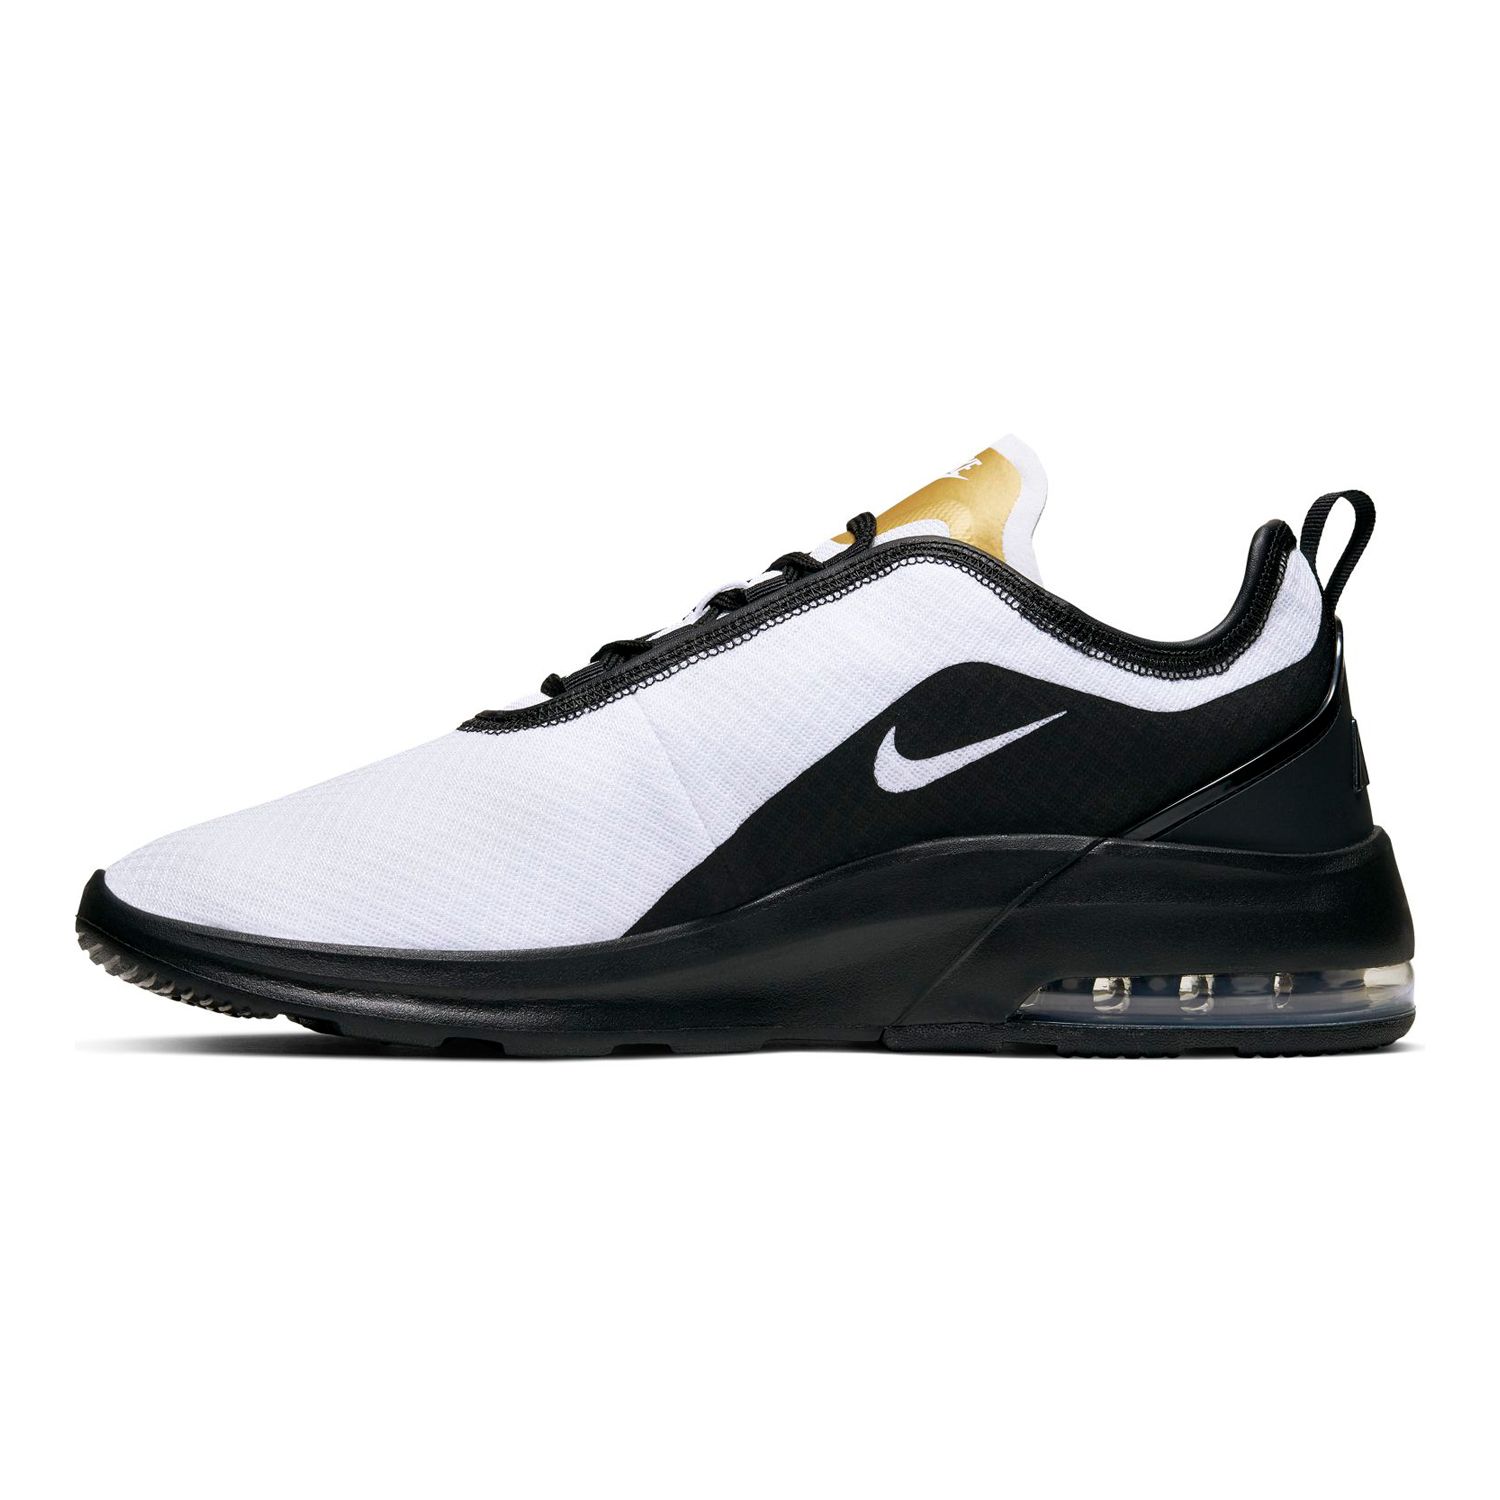 nike air max motion 2 women's sneakers black and gold